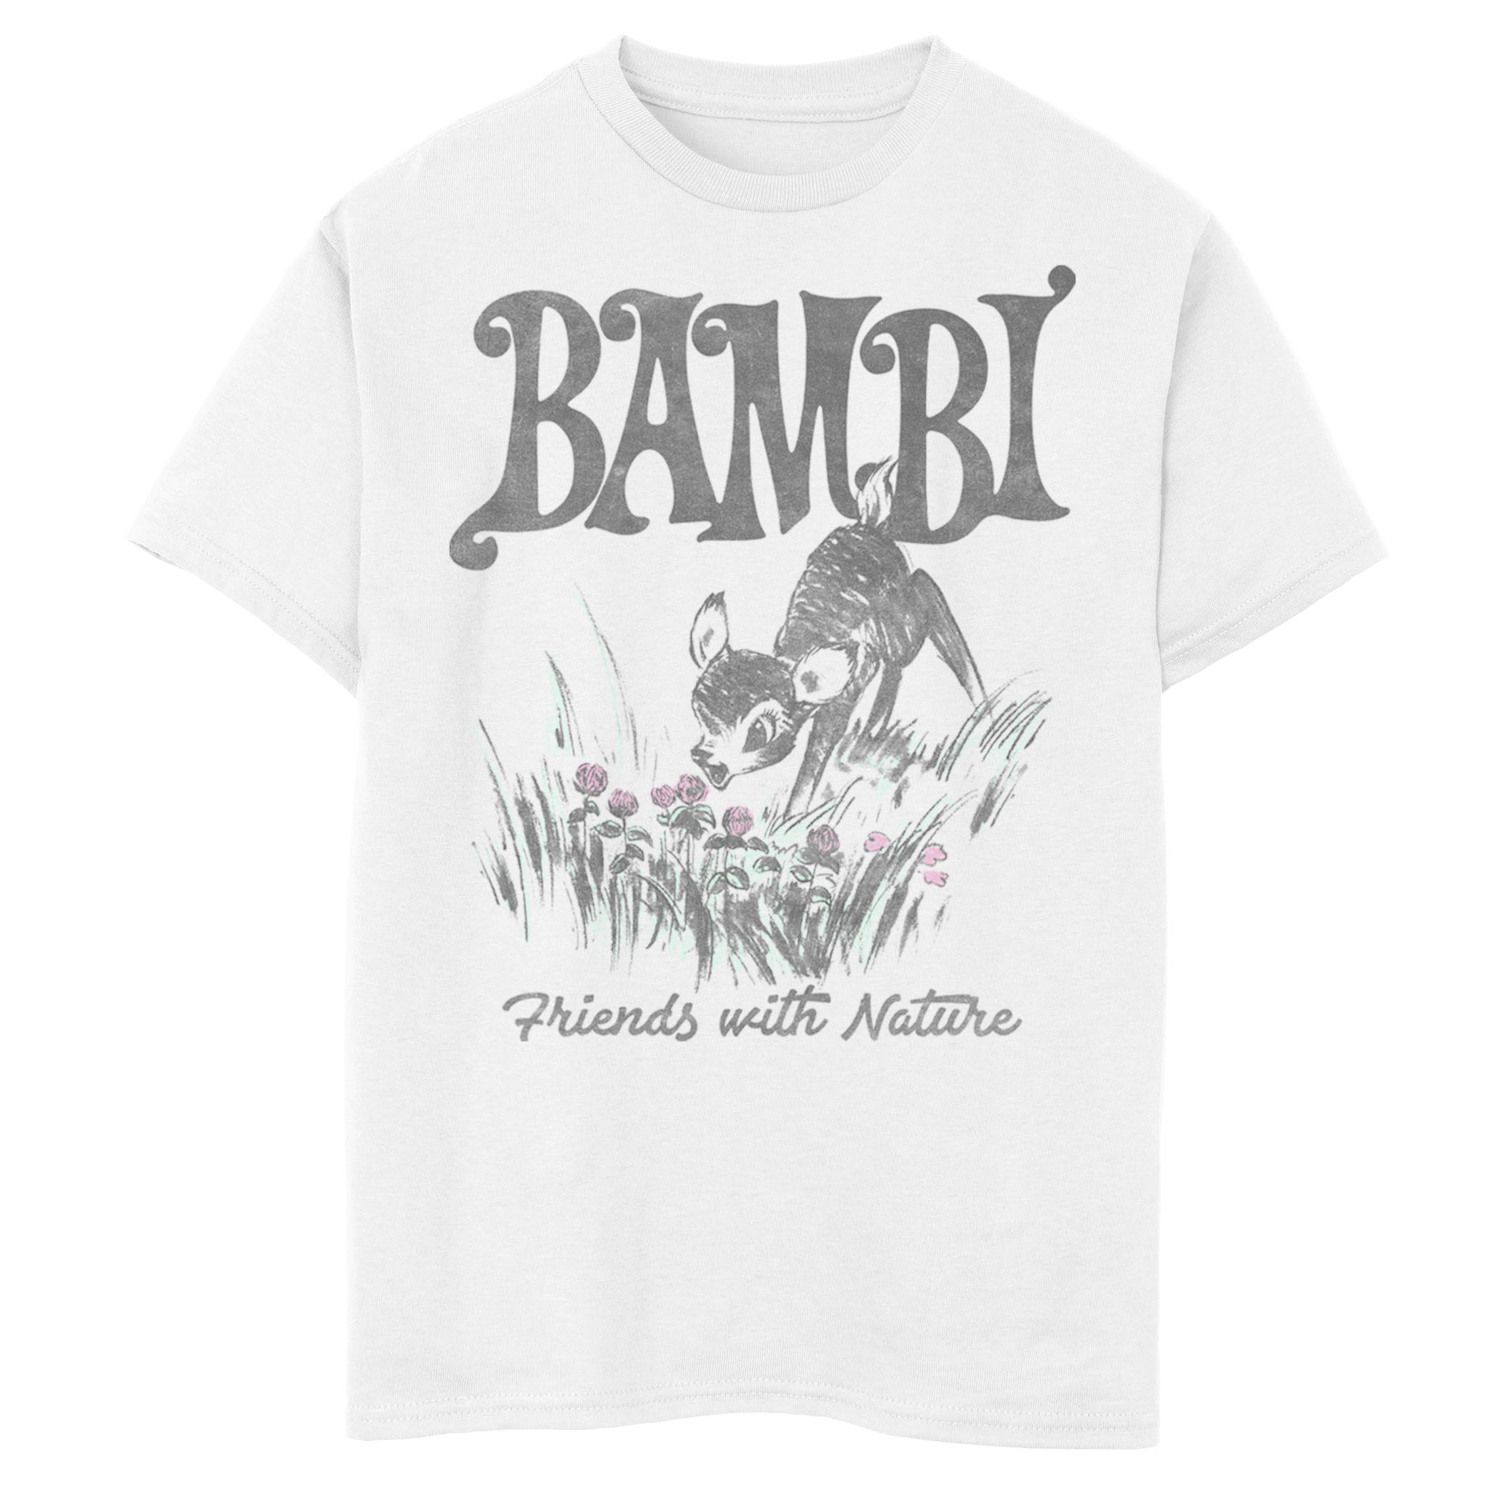 Image for Disney 's Bambi Boys 8-20 Friends With Nature Pencil Sketch Graphic Tee at Kohl's.